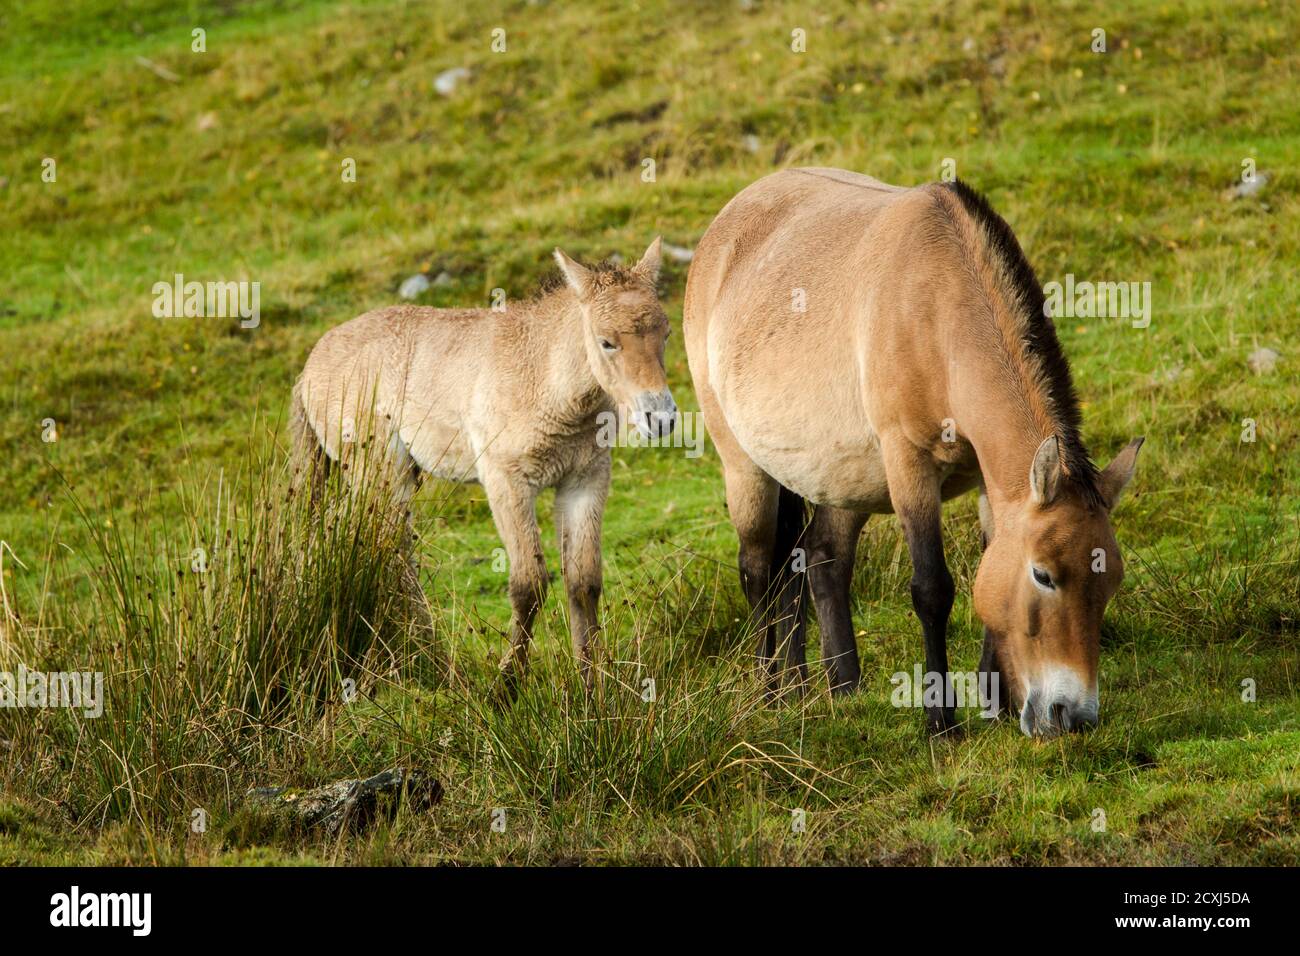 A mare and foal Przewalski's horse ( Equus przewalskii) or (Equus ferus przewalskii), also called the Mongolian wild horse or Dzungarian horse, is a r Stock Photo